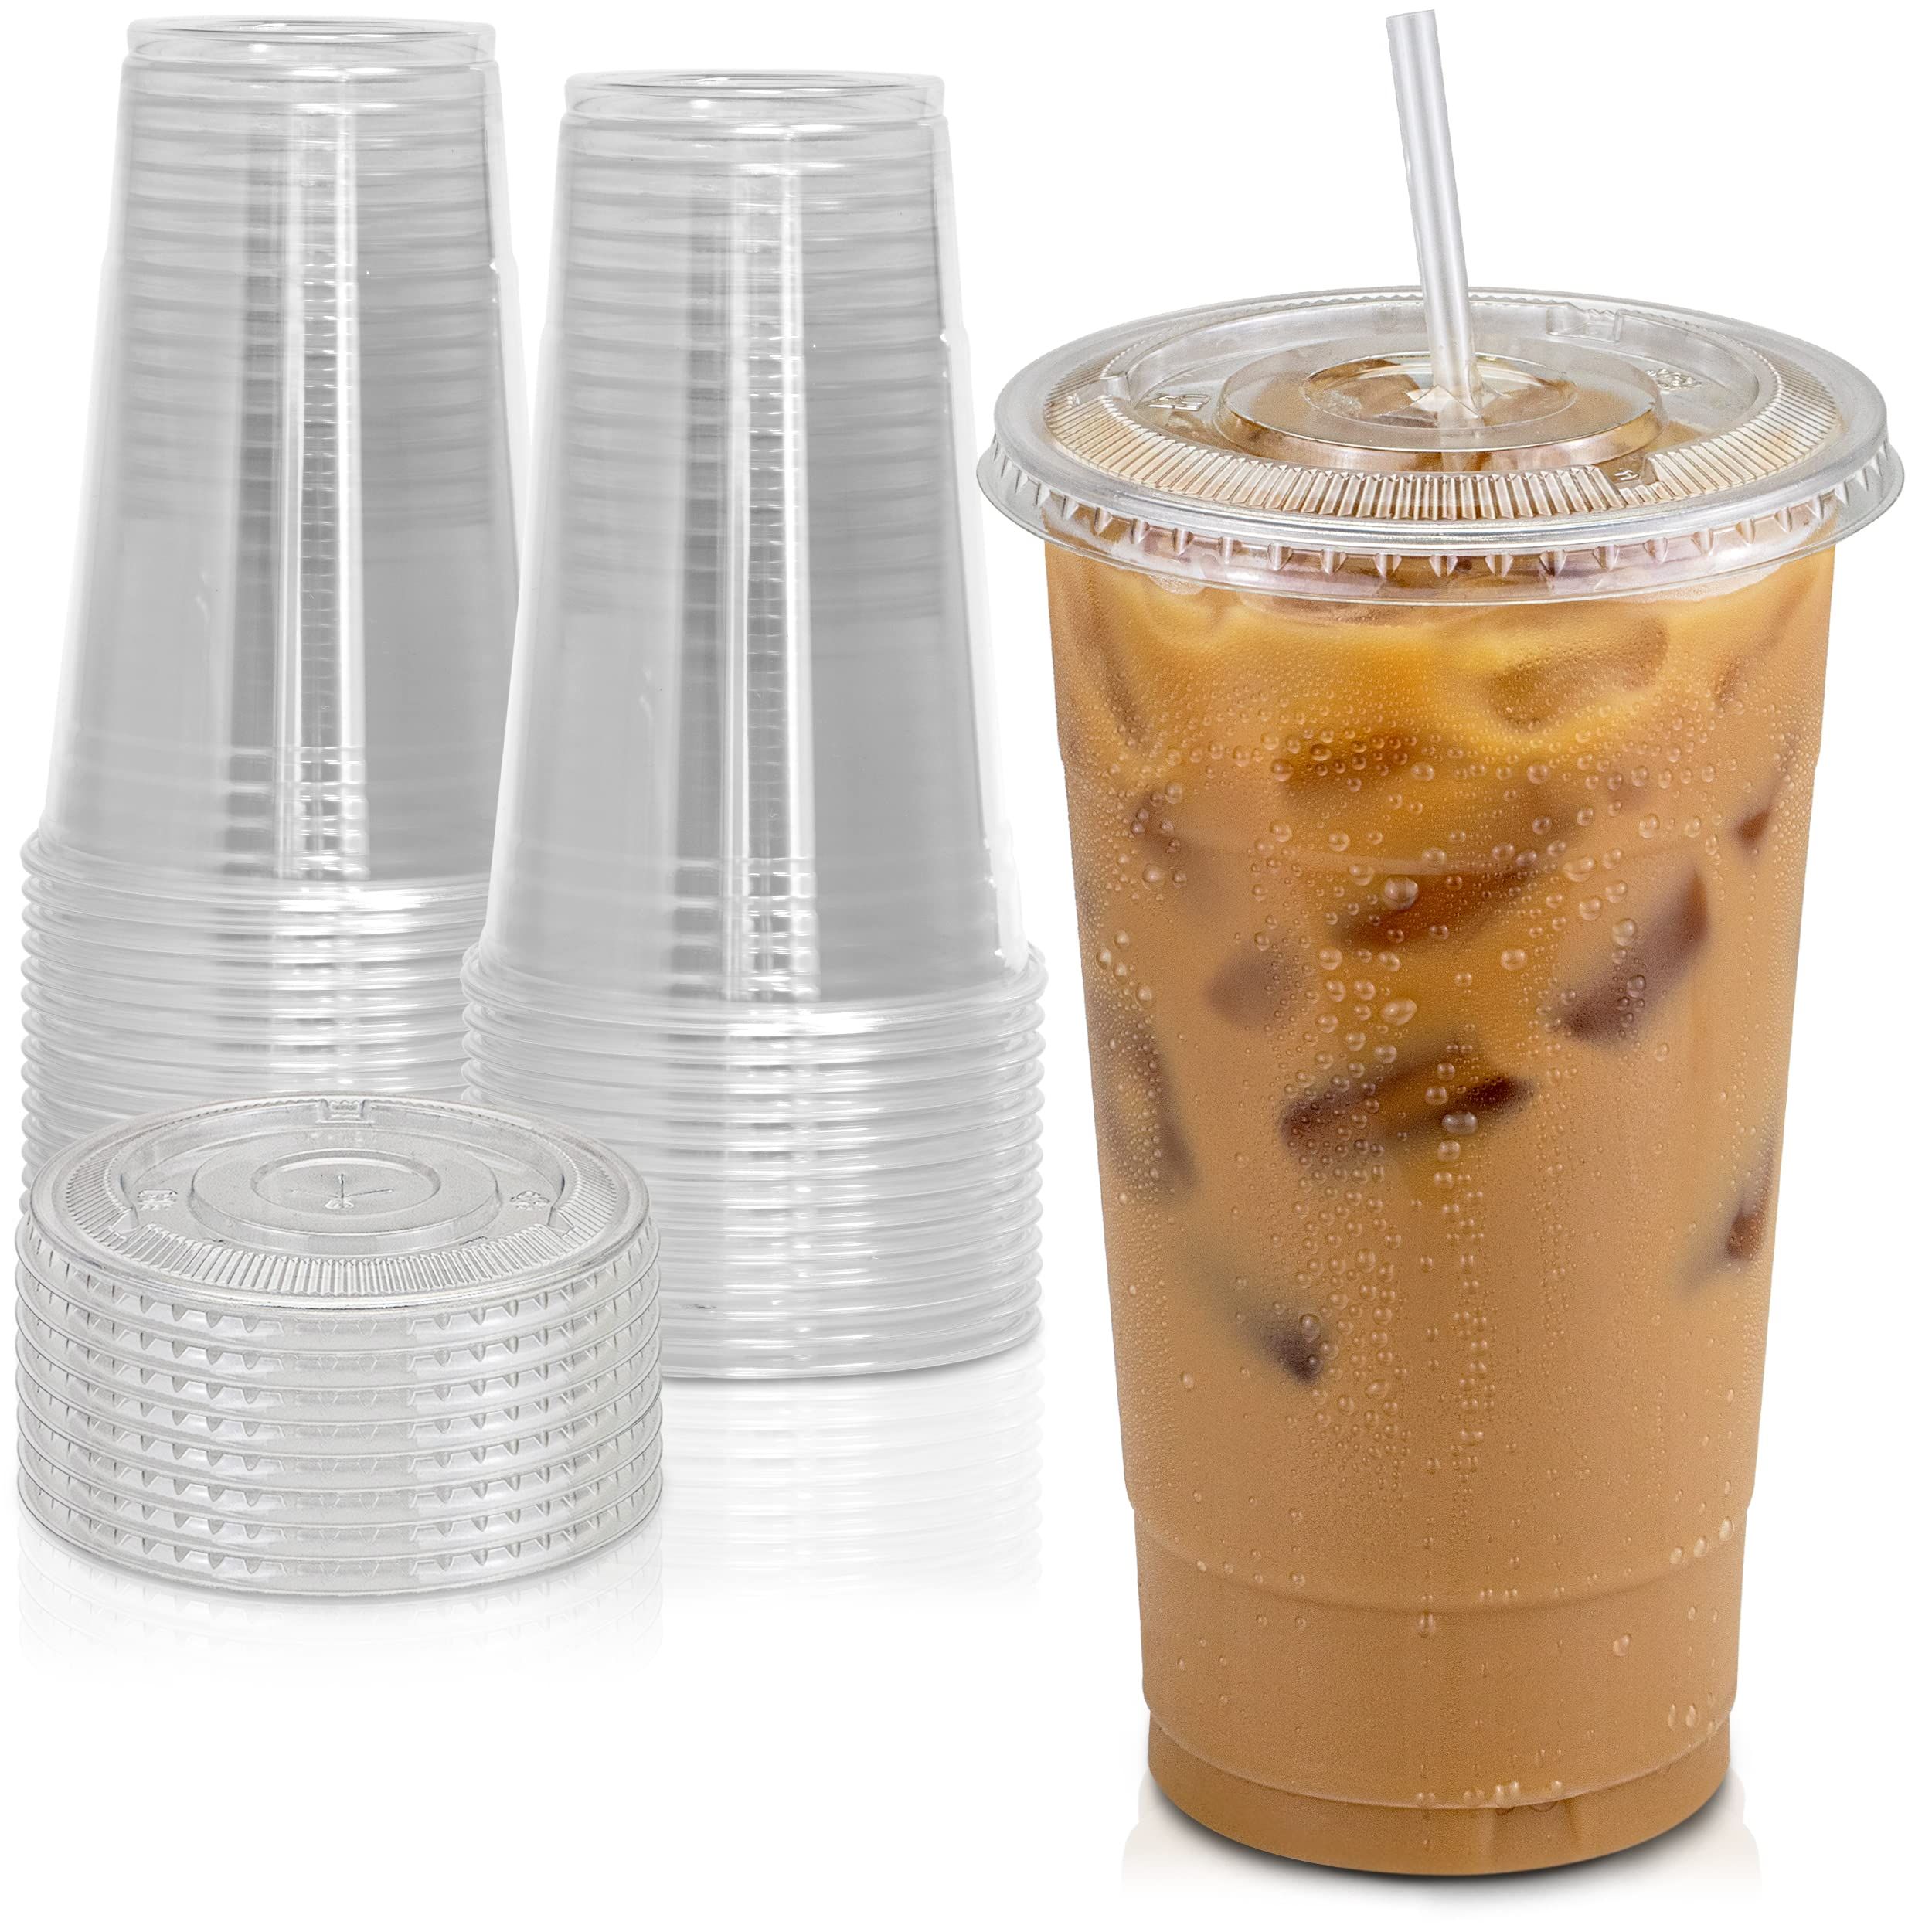 12 Oz Plastic Cups with Lids